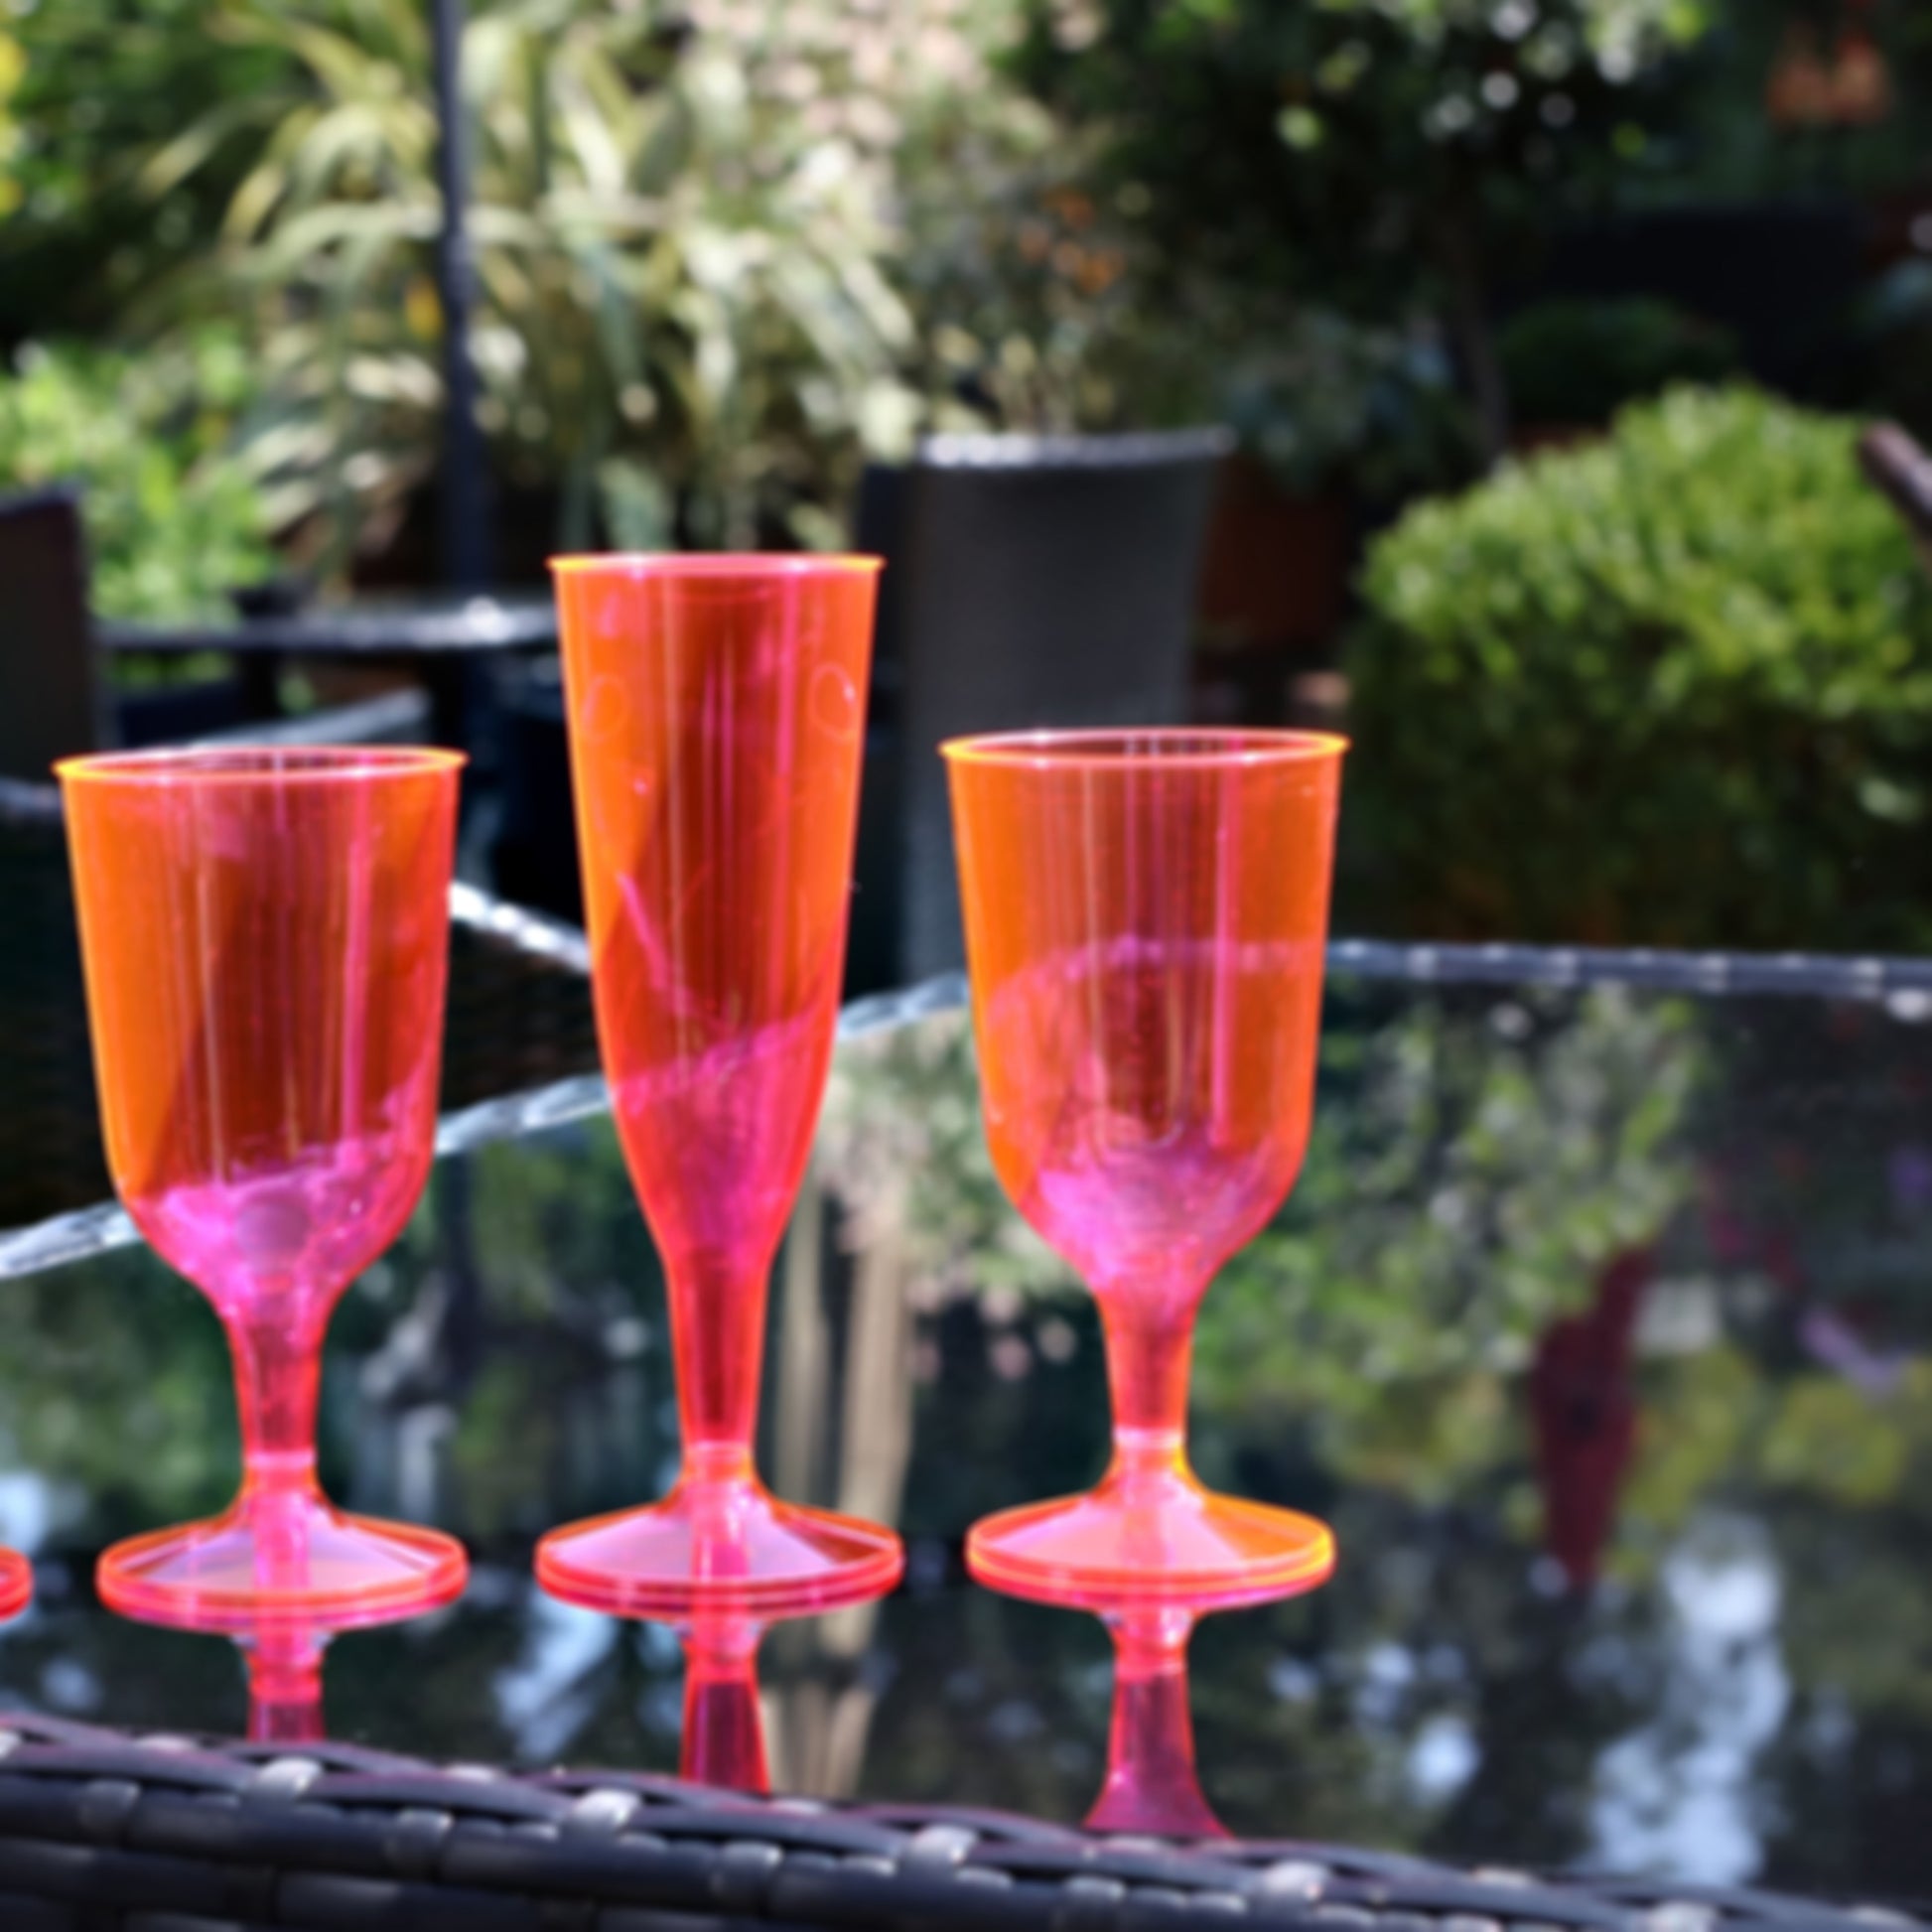 6 x Pink Prosecco Flutes 175ml 6oz Capacity Recyclable Polystyrene Material Transparent 2-Piece Sturdy Champagne Glasses BBQs Picnics-5056020183570-PCUP-CHAMP2PPINK-Product Pro-Champagne Glasses, Clear Champagne Glasses, Pink, Plastic Flutes, Prosecco Flutes